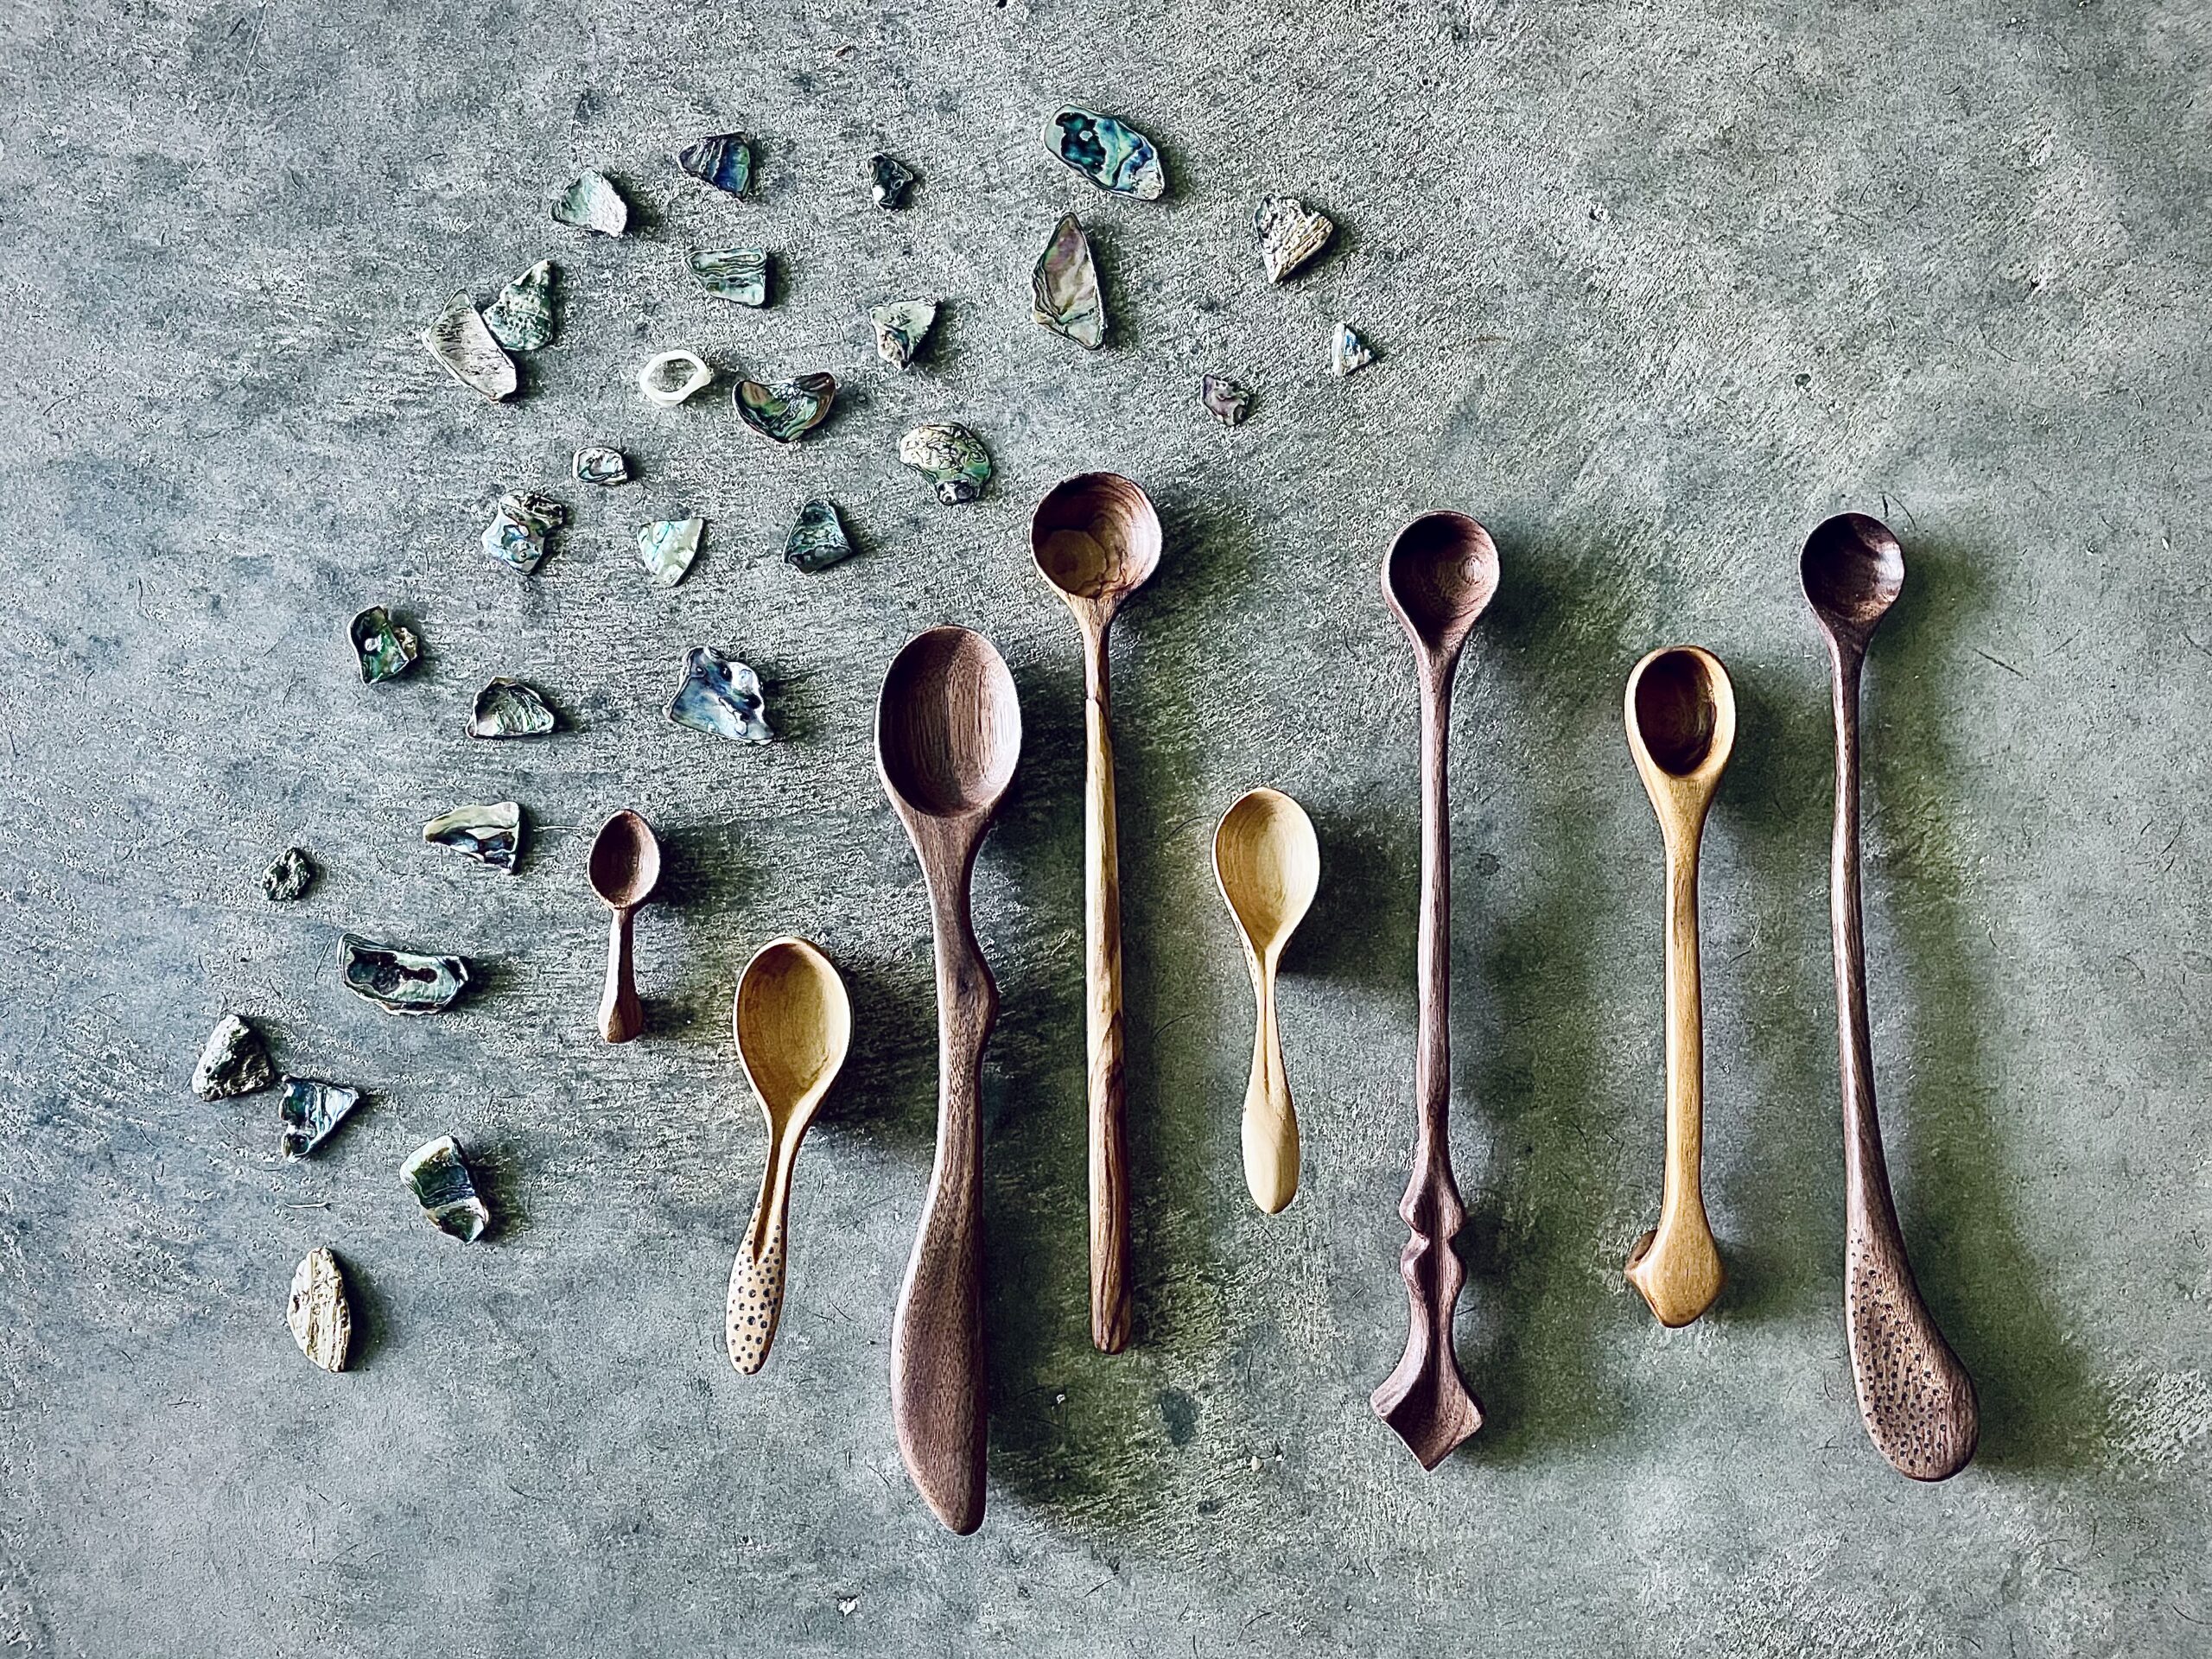 Coral Springs Museum of Art Hosts "The Joy of Spoon Carving" Workshop with Ashley Look